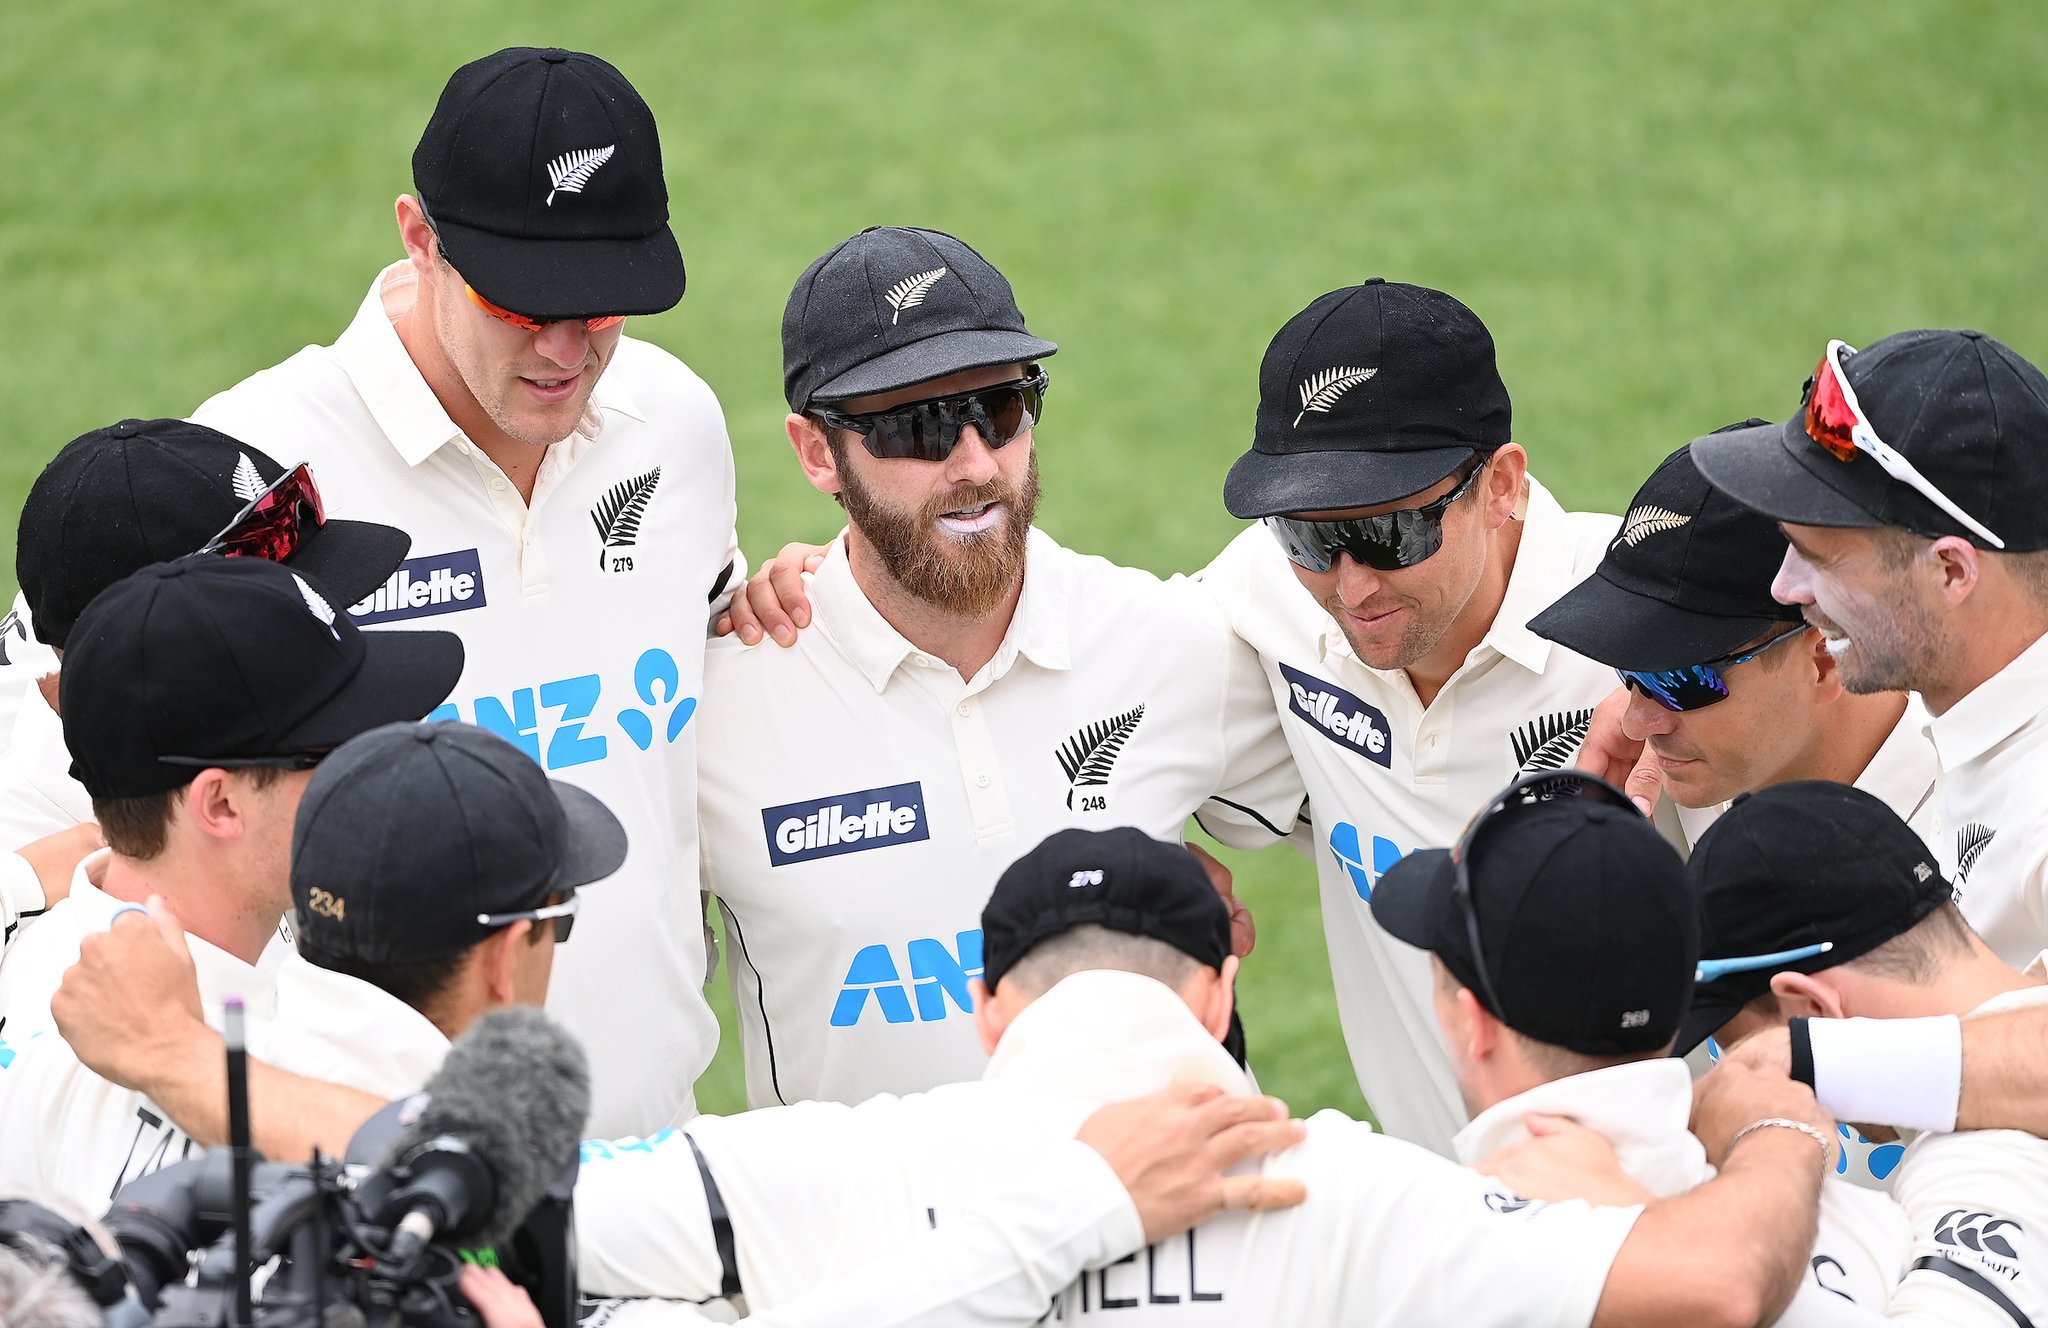 Kyle Jamieson, Tim Southee out New Zealand ahead of West Indies at stumps on Day 2 - The Statesman